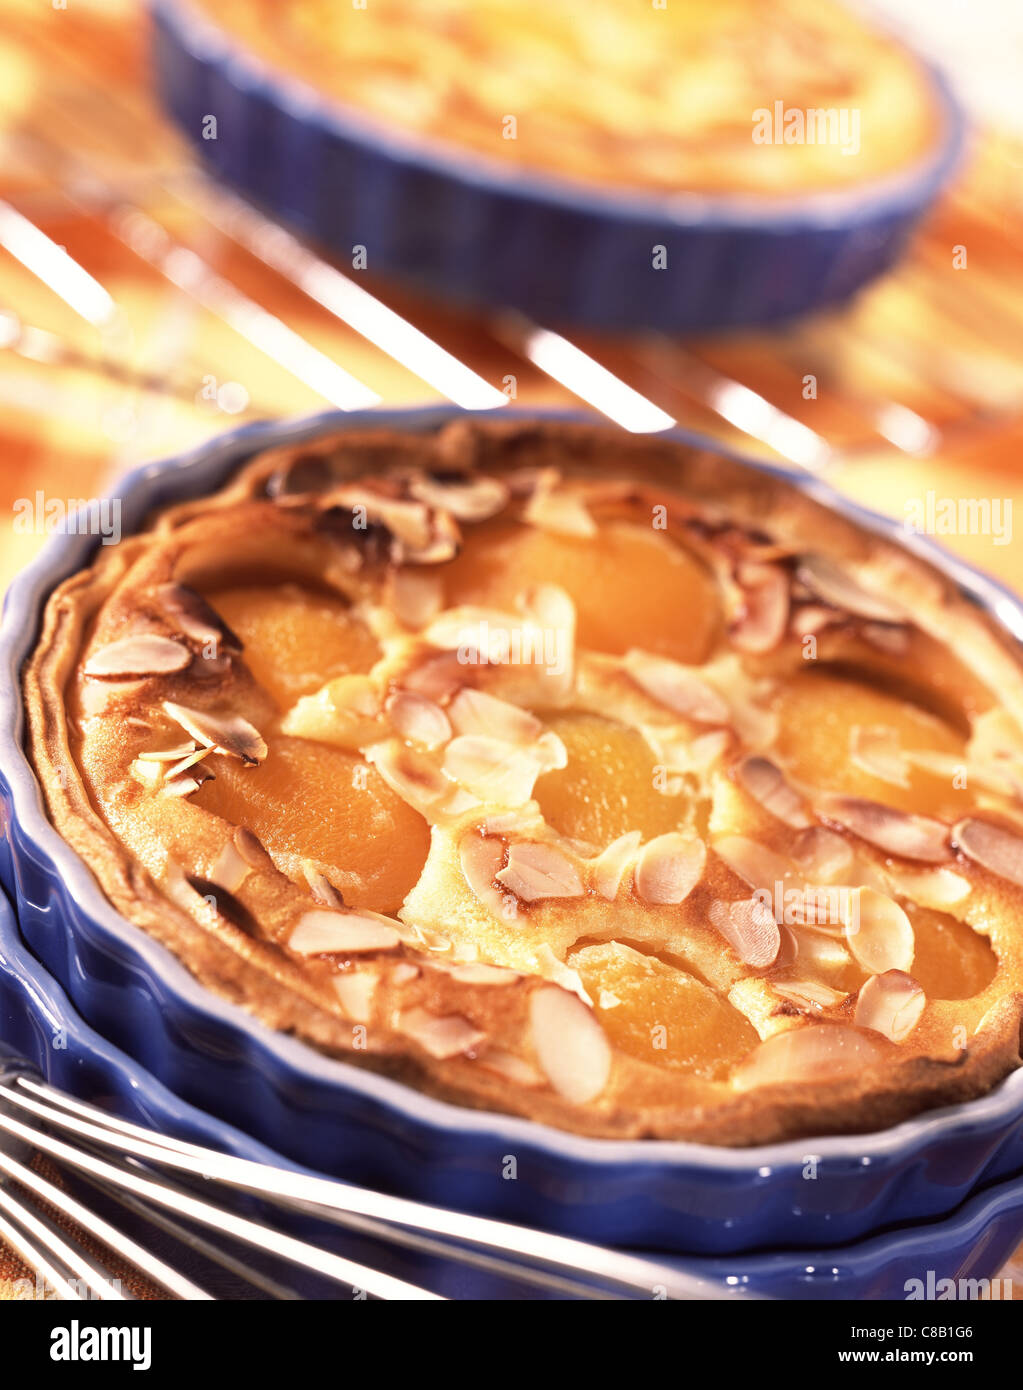 Almond and apricot tartlets Stock Photo